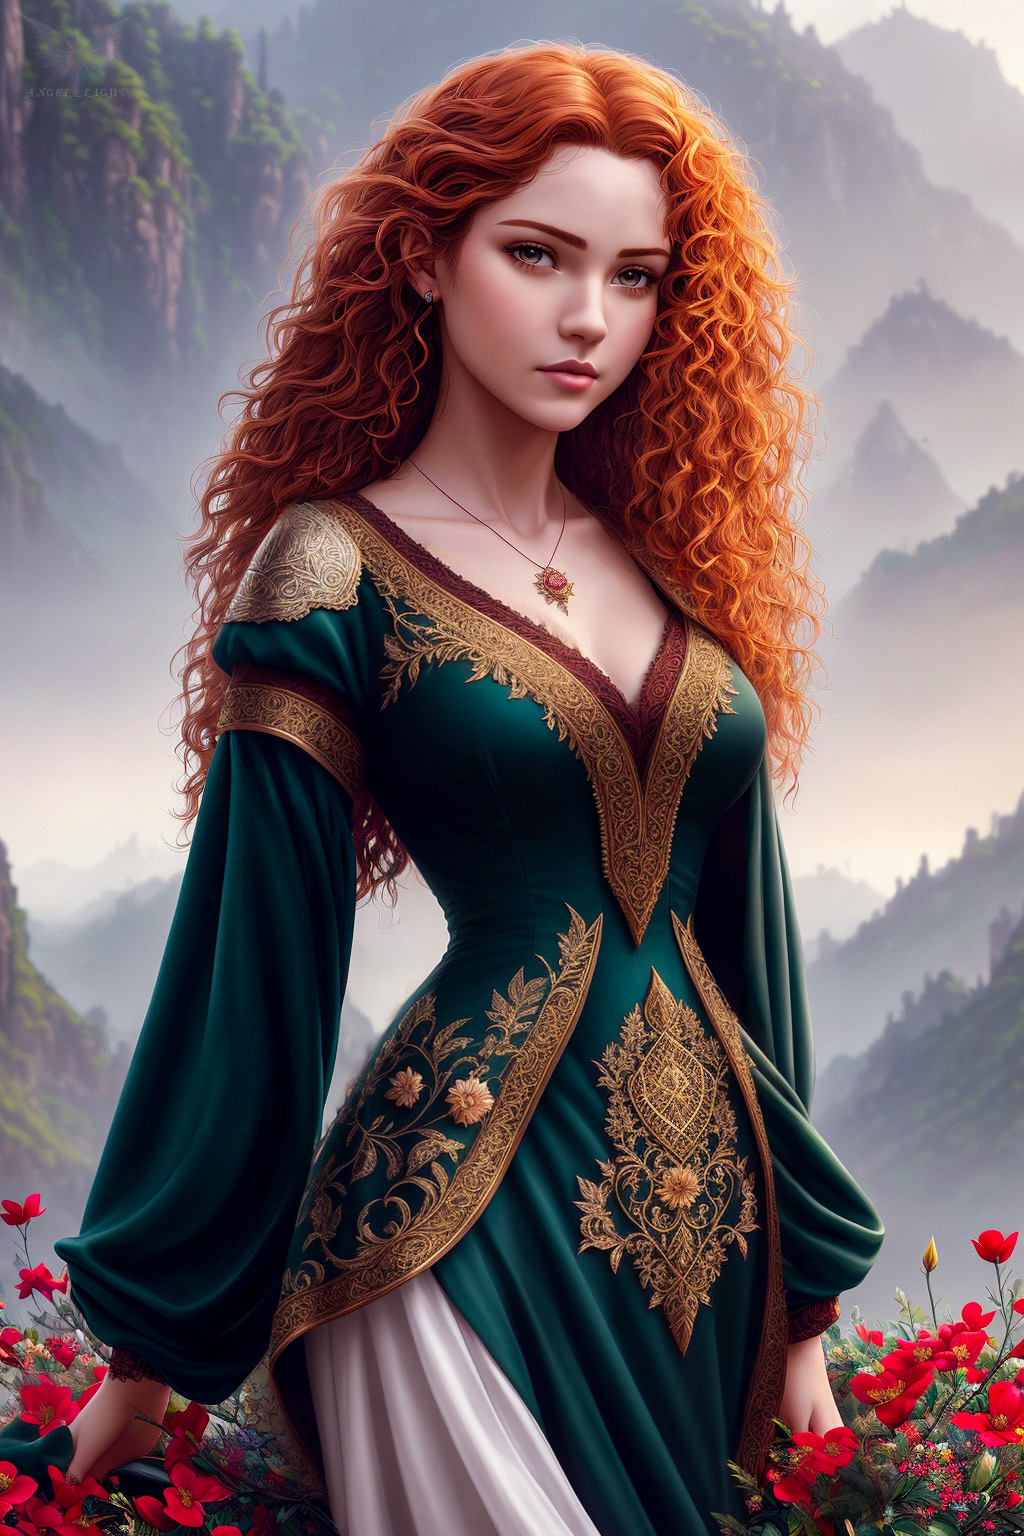 General 1024x1536 AI art Angel Light Disney princesses outdoors slim body redhead daylight Princess Merida mountains flowers gown looking at viewer portrait display wavy hair necklace dress